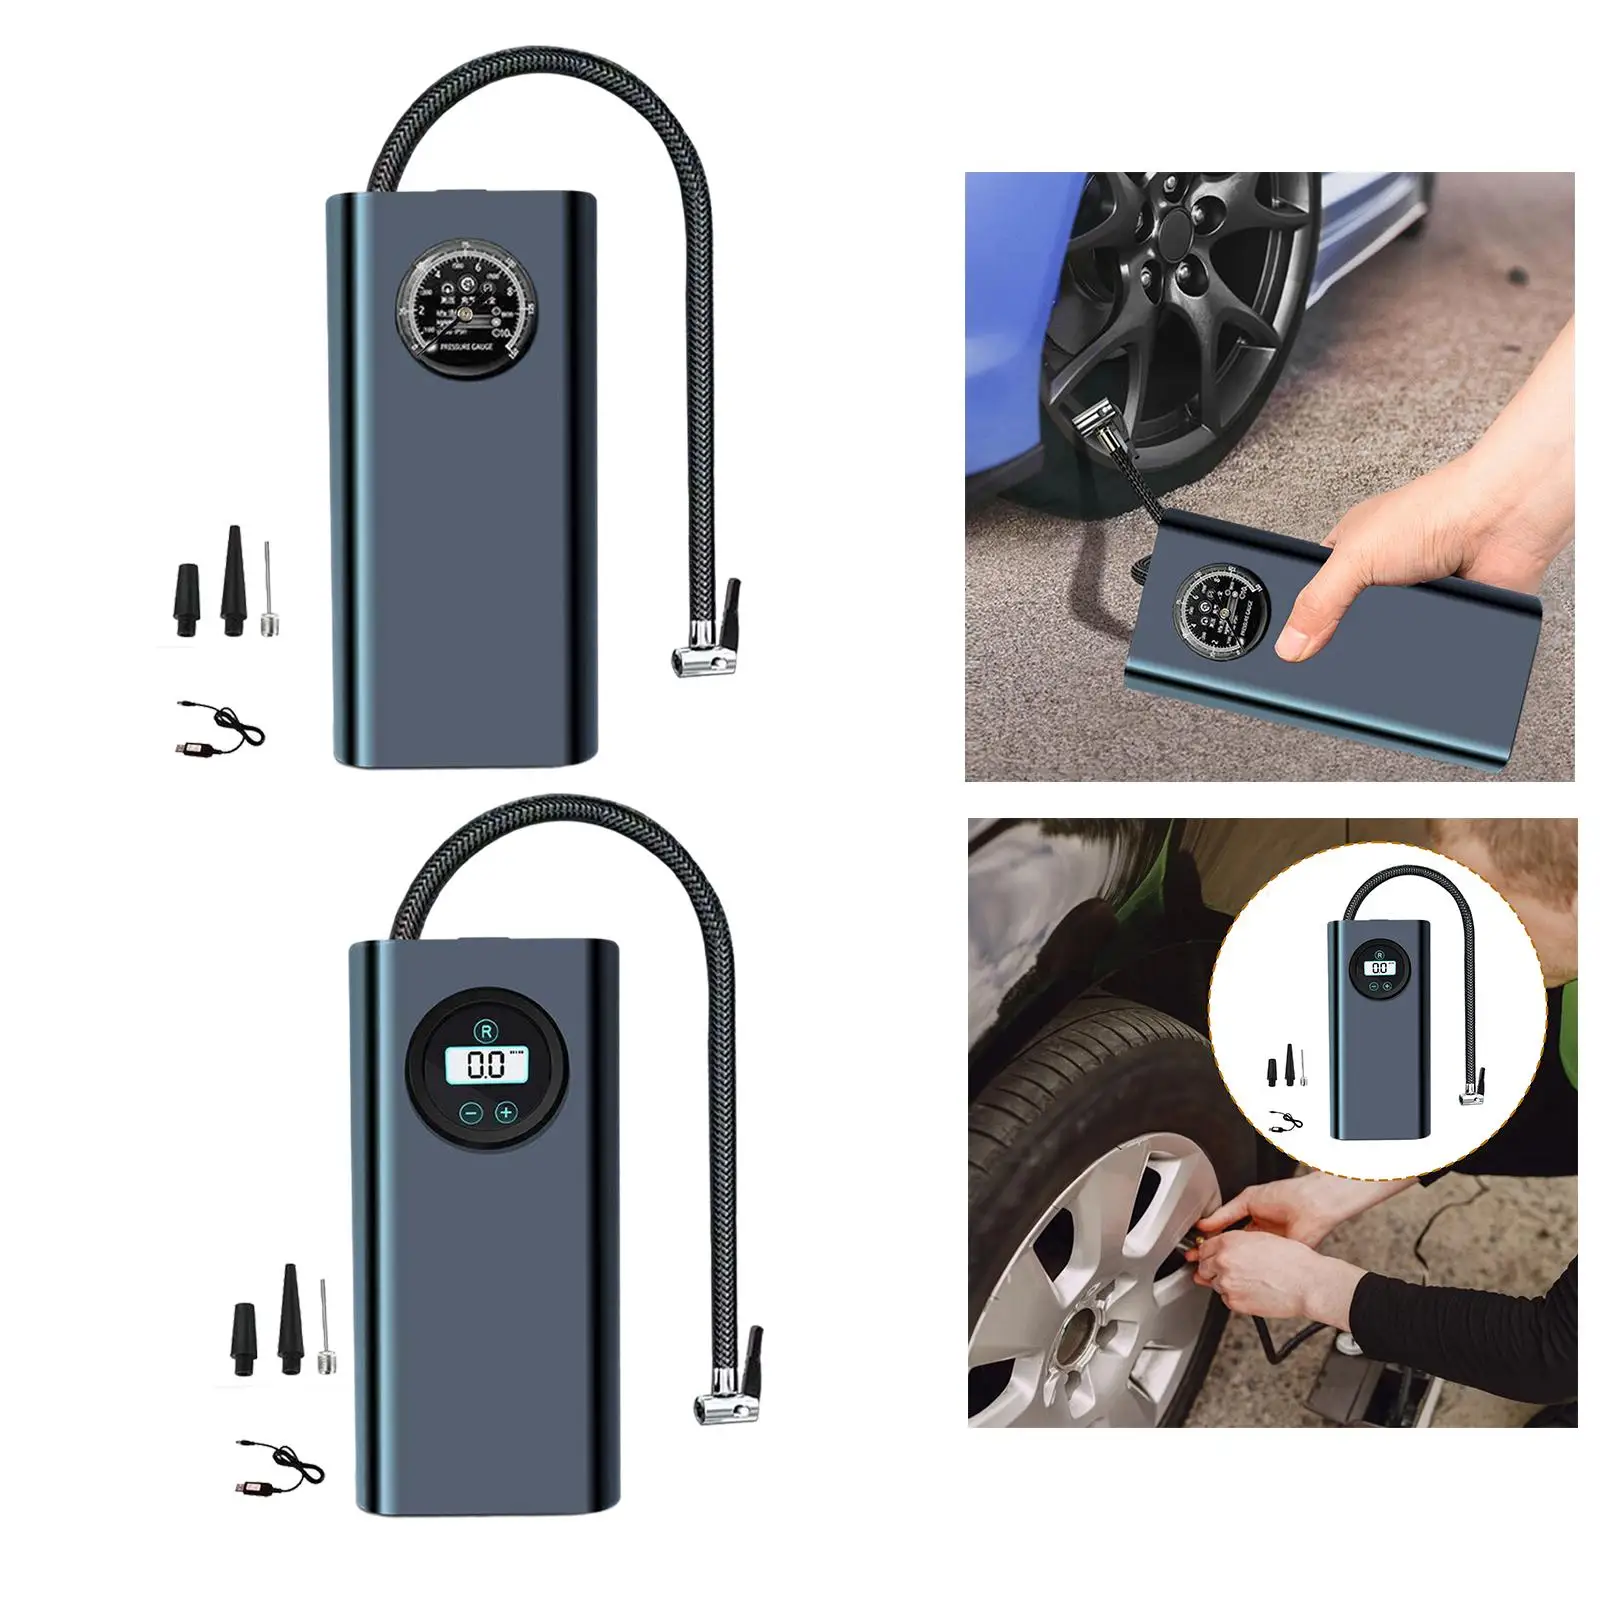 Cordless Tire Inflator Compact Pump Auto Accessories Tire Pump Portable Air Compressor for Motorcycle Cars SUV Trucks Bike